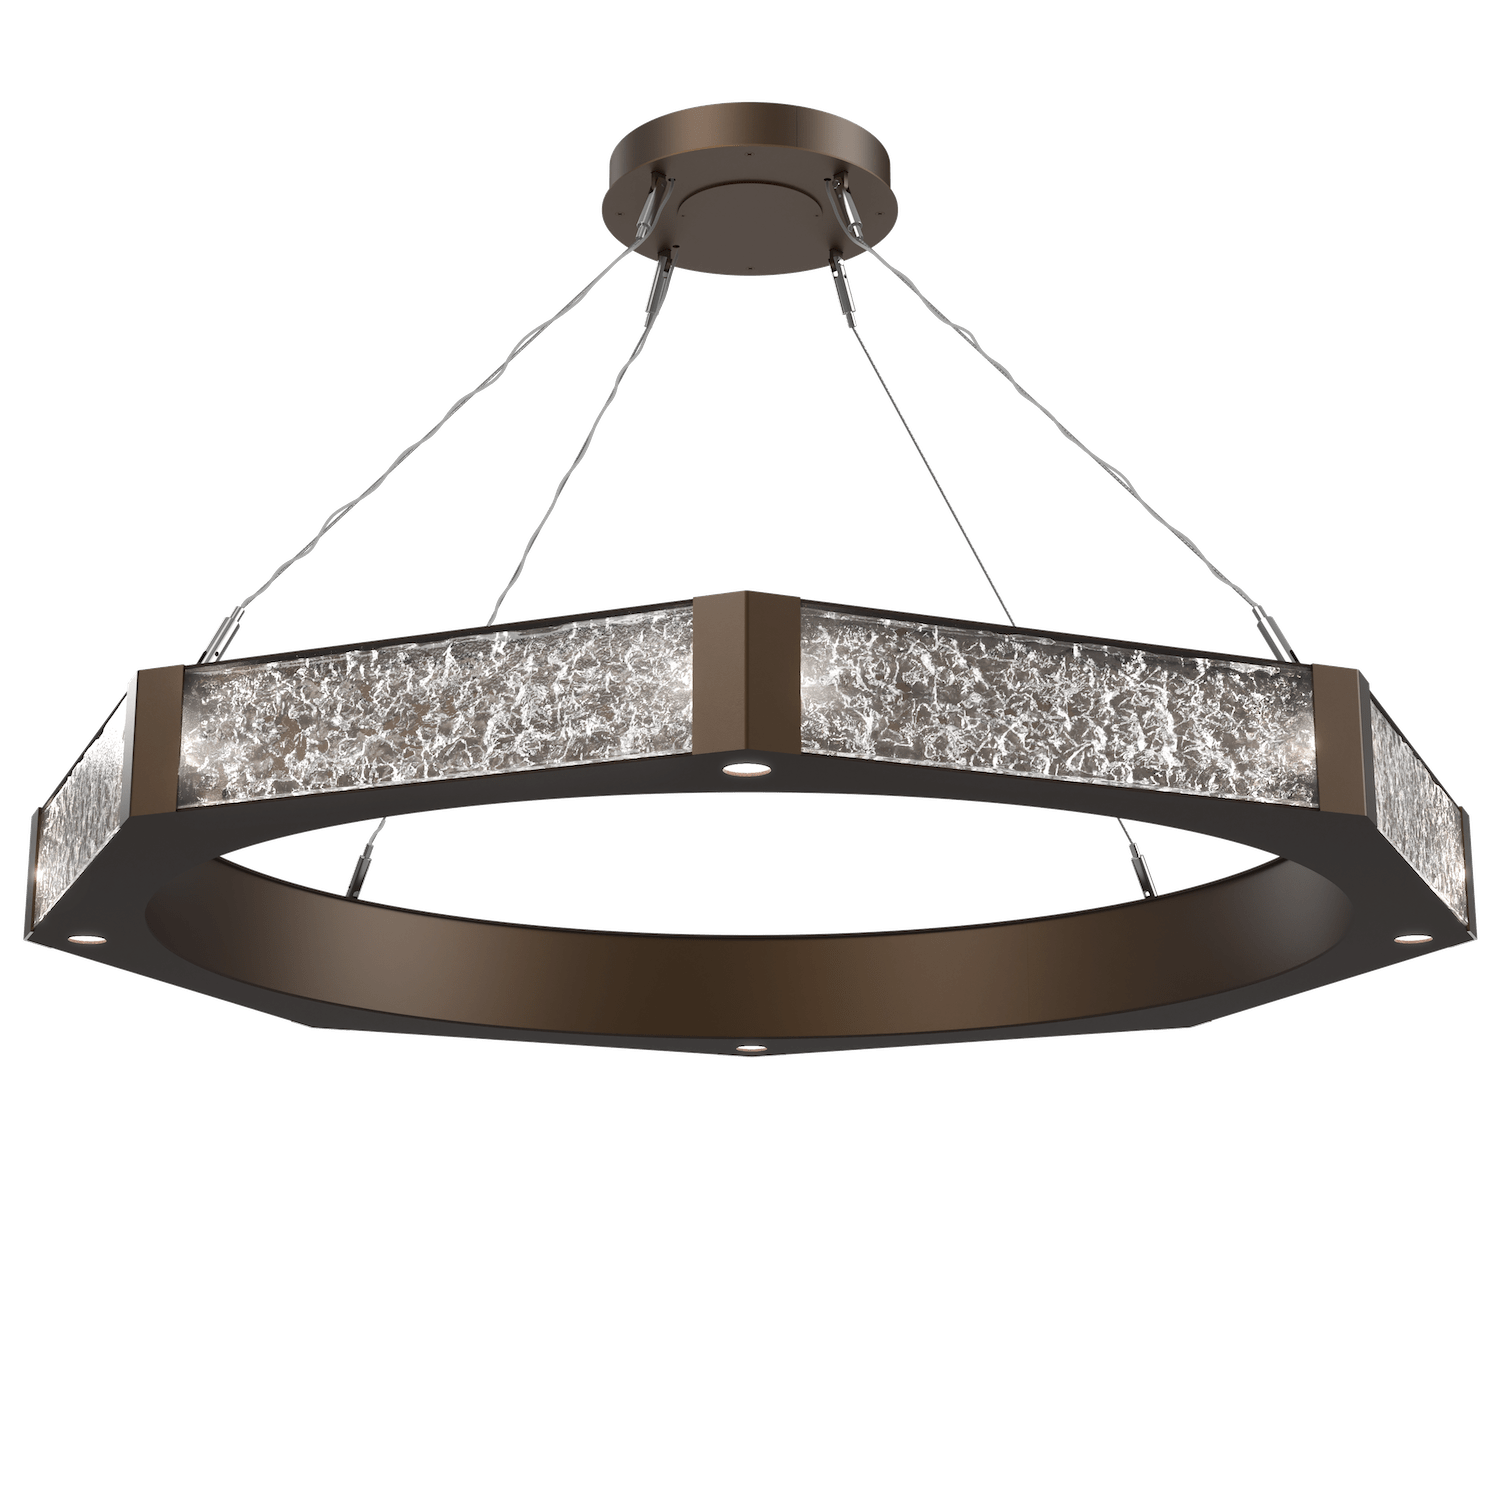 CHB0061-48-FB-GC-Hammerton-Studio-Glacier-48-inch-ring-chandelier-with-flat-bronze-finish-and-clear-blown-glass-with-geo-clear-cast-glass-diffusers-and-LED-lamping